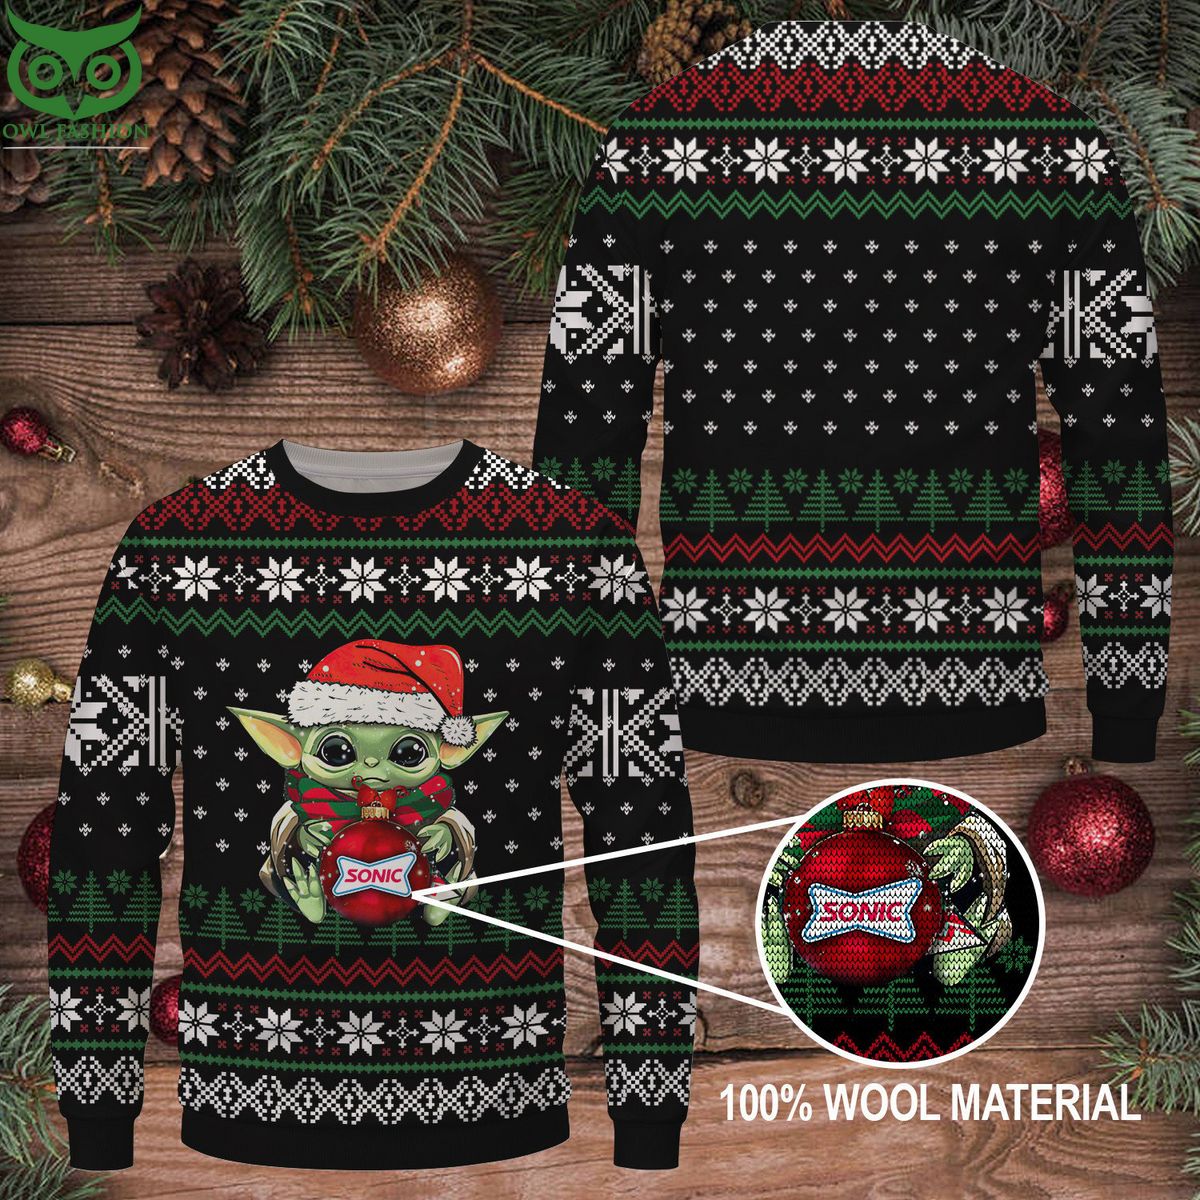 sonic drive-in baby Yoda Premium Ugly Sweater